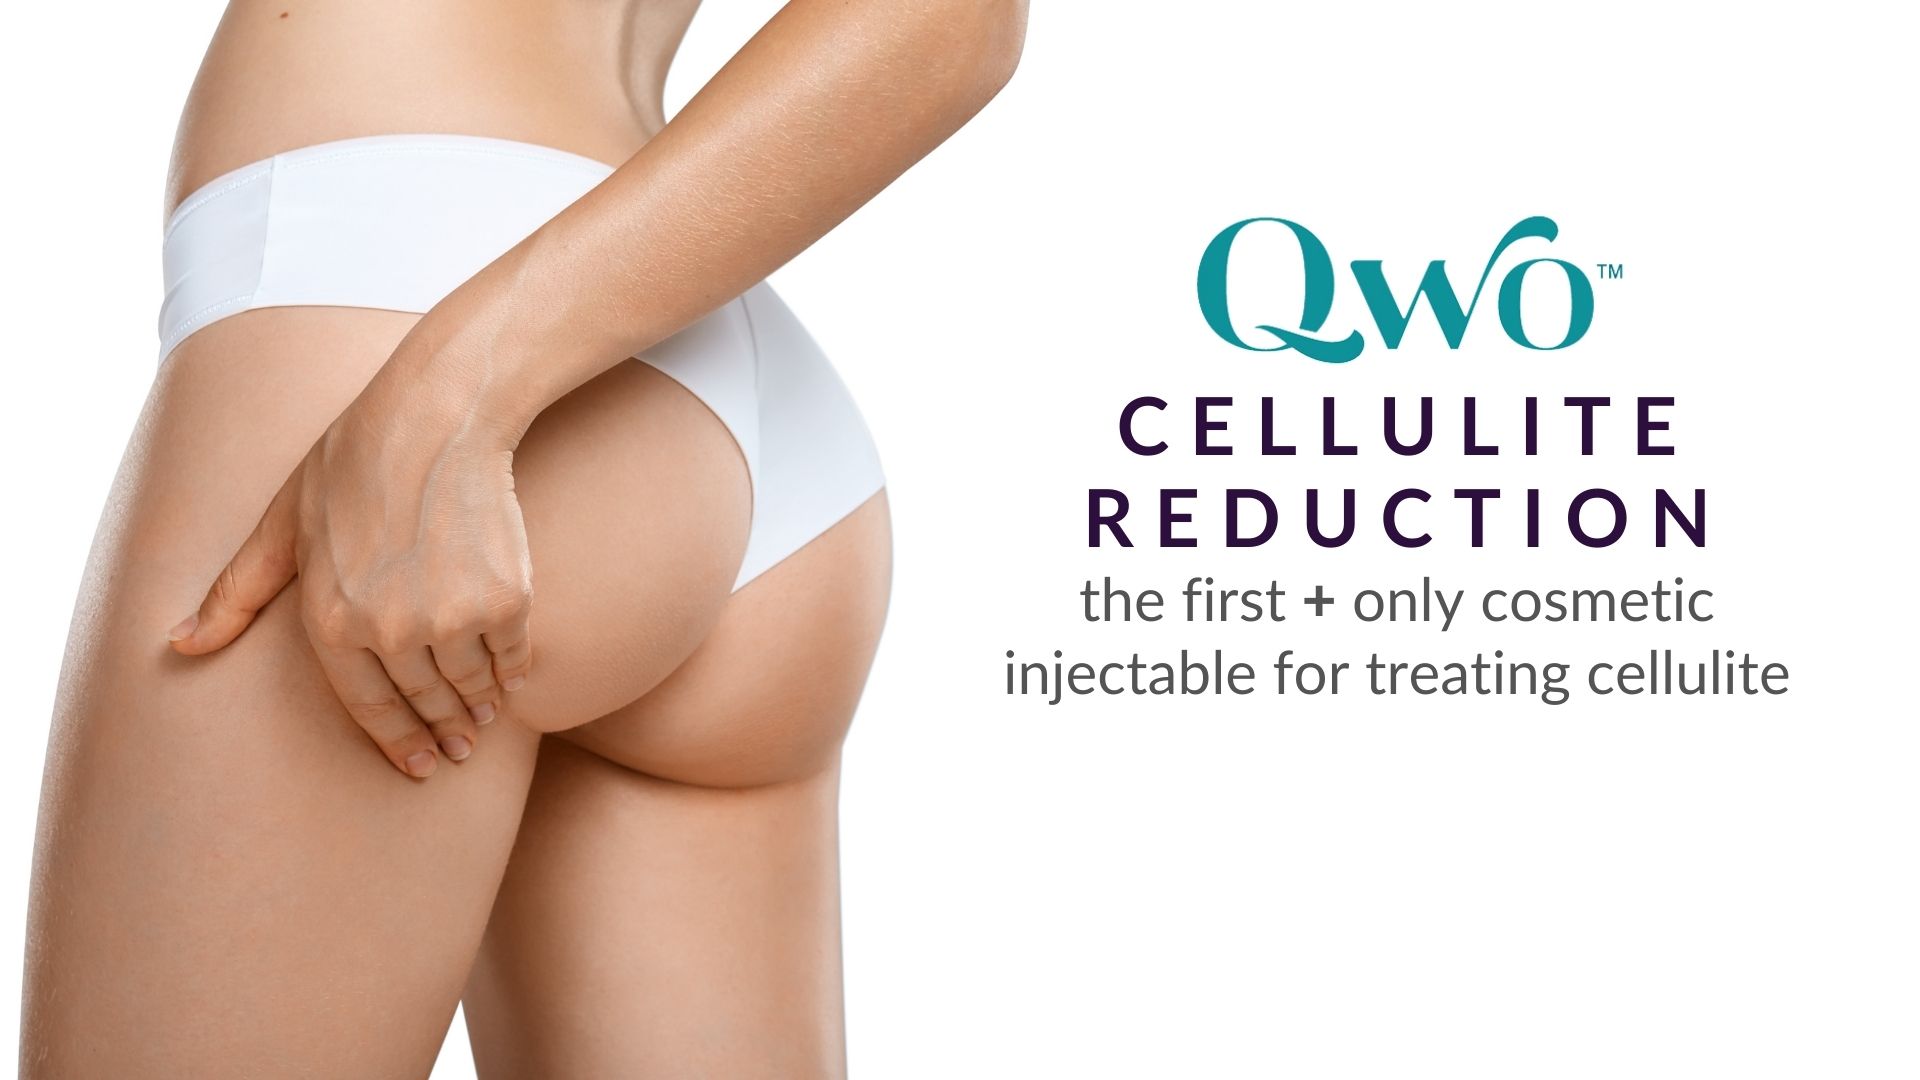 Woman pinches her thigh promoting QWO cellulite reduction treatment